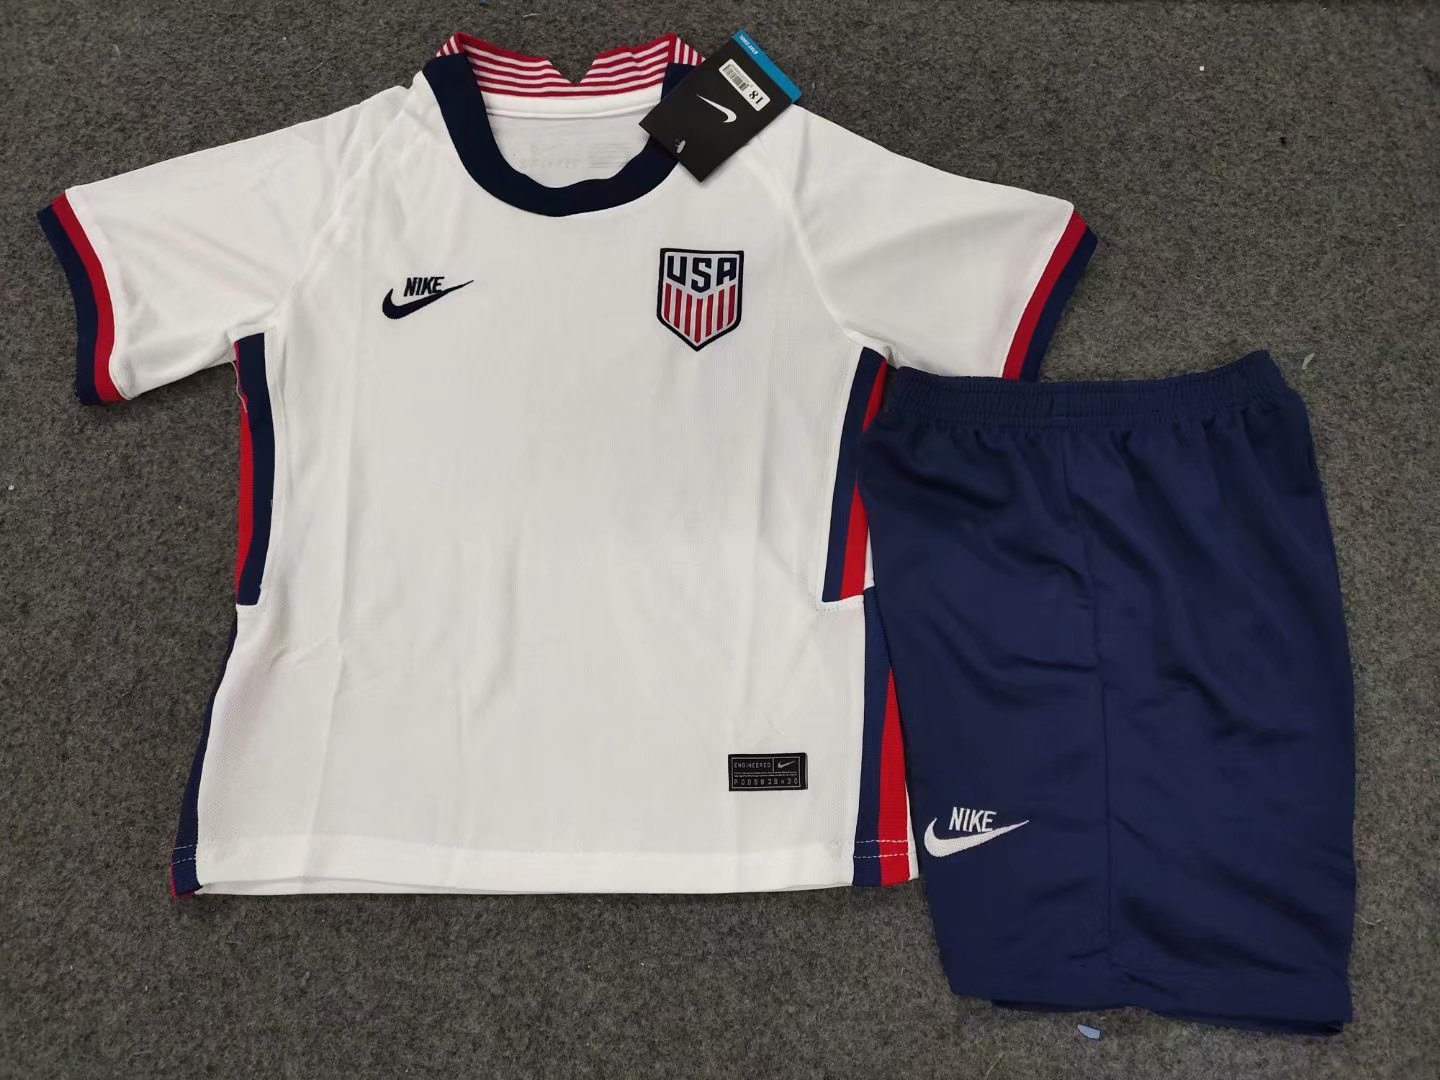 the United States of America home kids kit USA 2020 